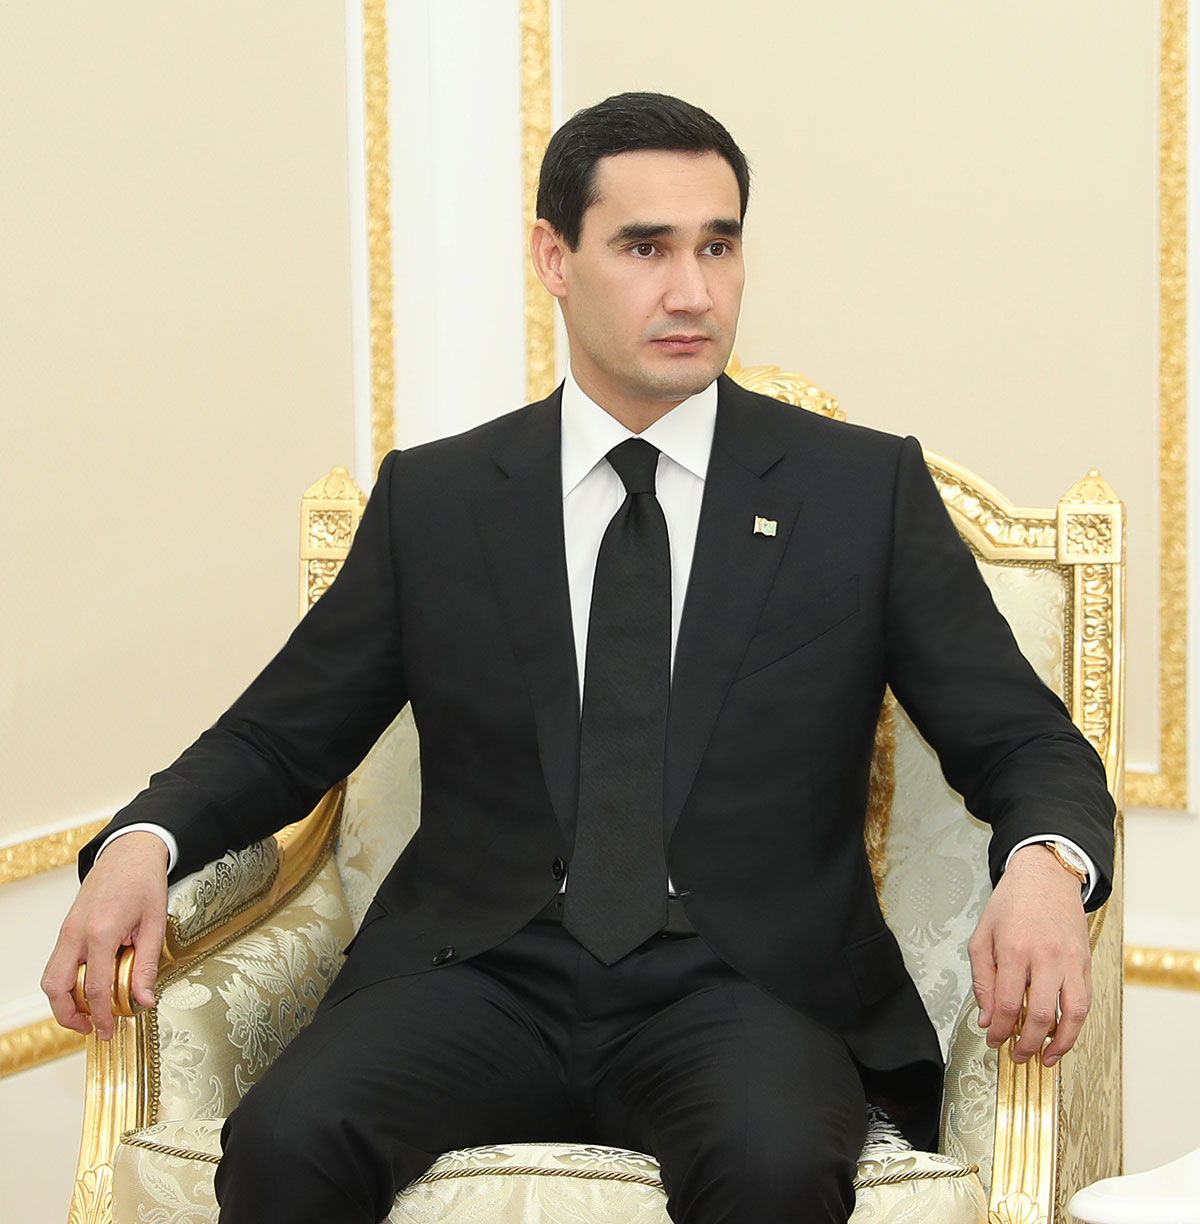 The President of Turkmenistan received the CEO of Dragon Oil Company